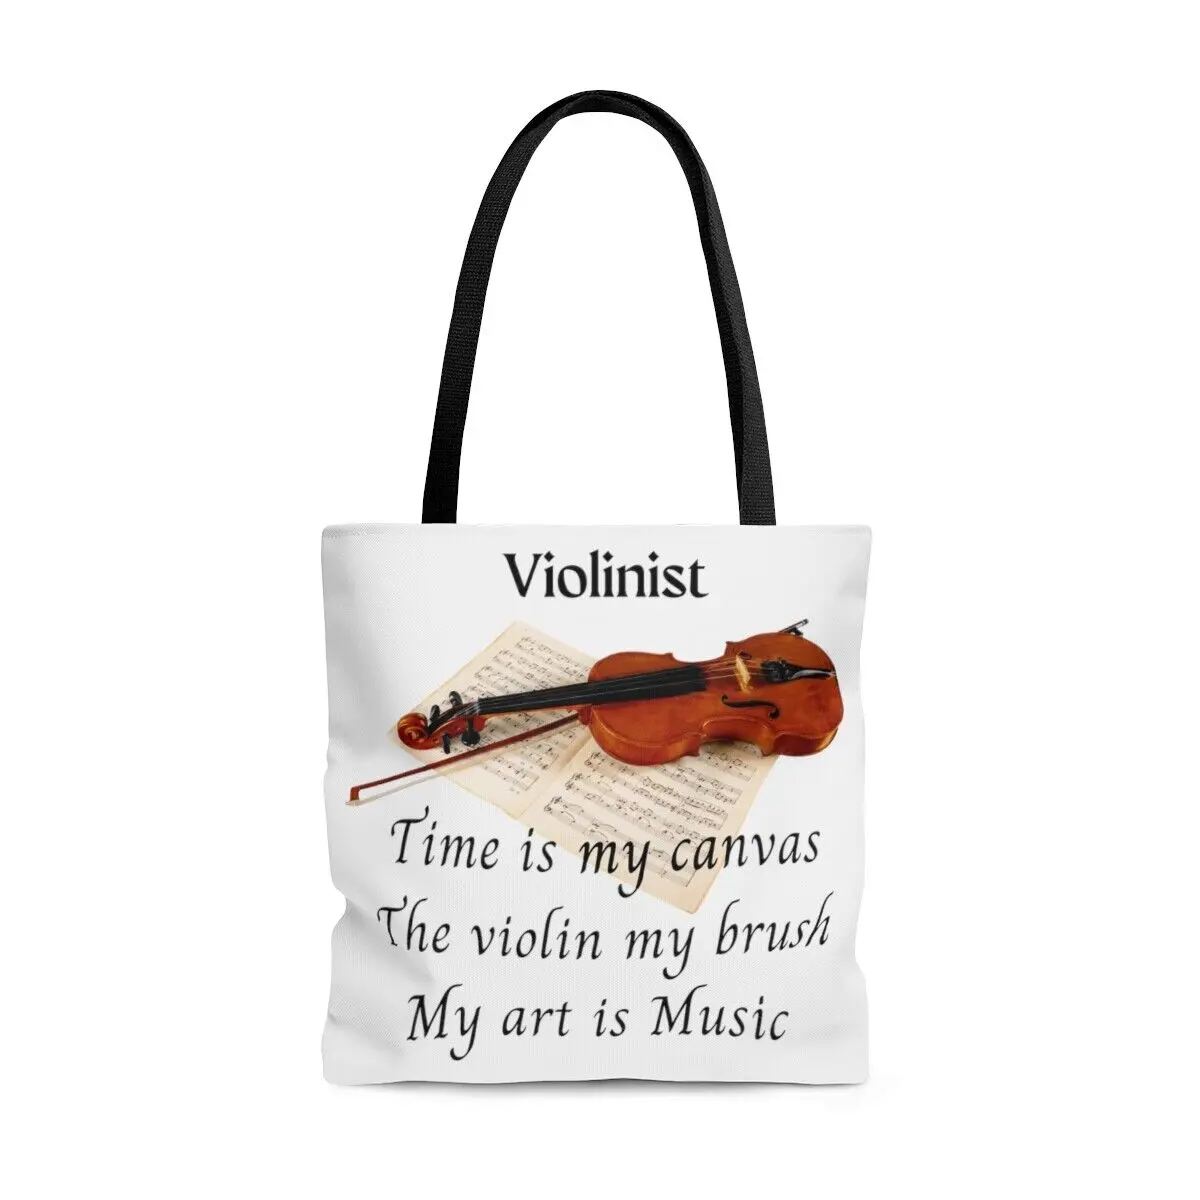 violin tote bag - Why is the New Yorker tote bag so popular